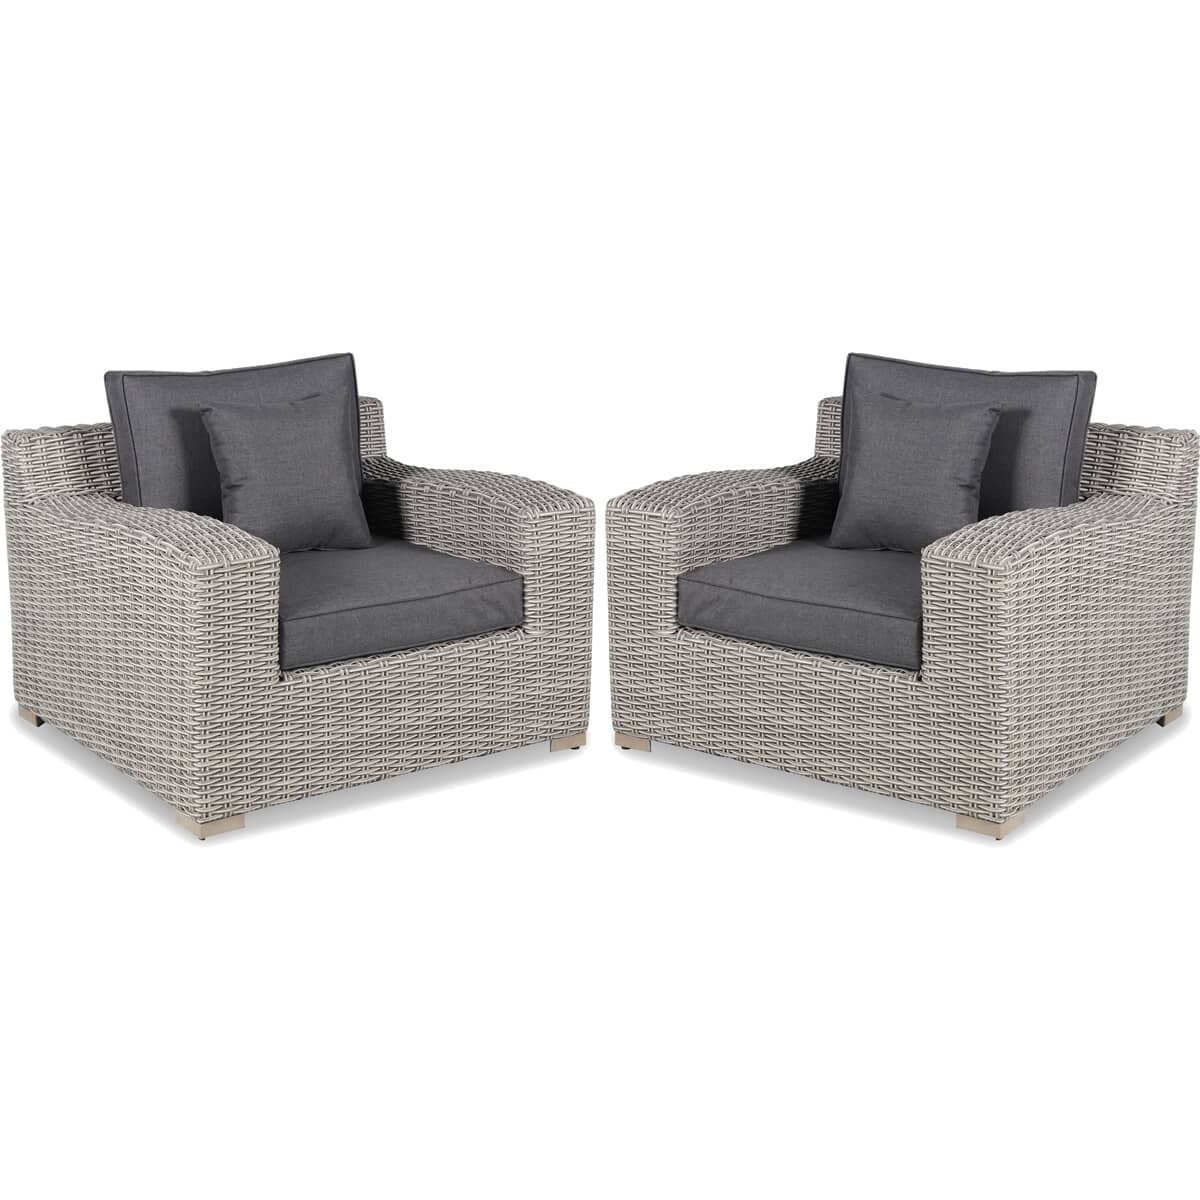 Kettler Palma Luxe Armchair Pair - Whitewash with Grey Taupe Cushions